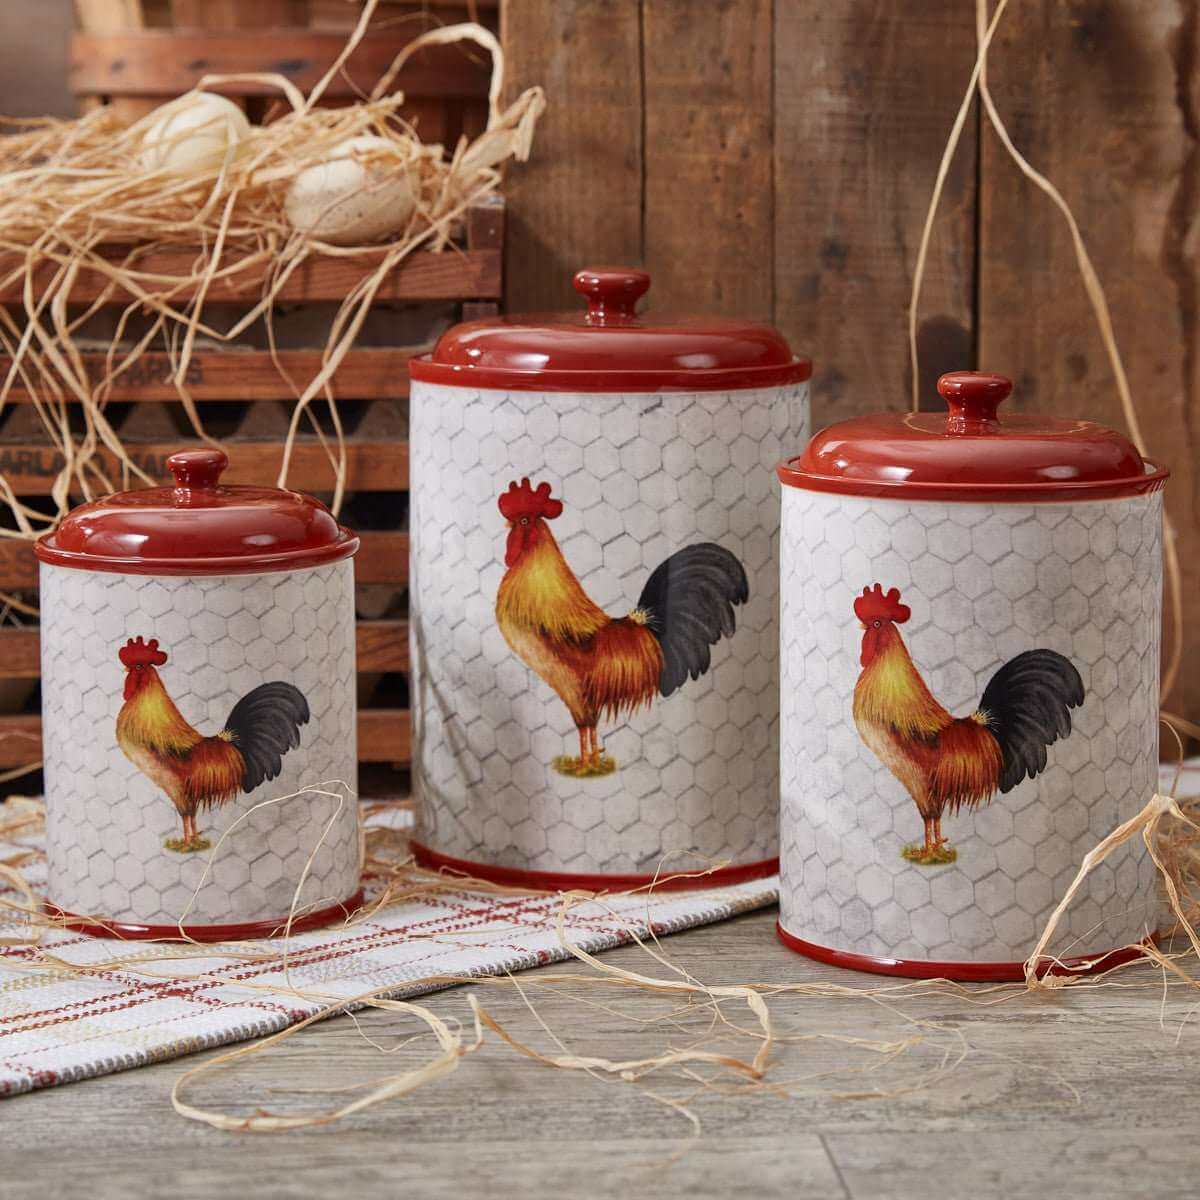 3 Piece Rooster Canister Set - Kitchen Tools & Utensils